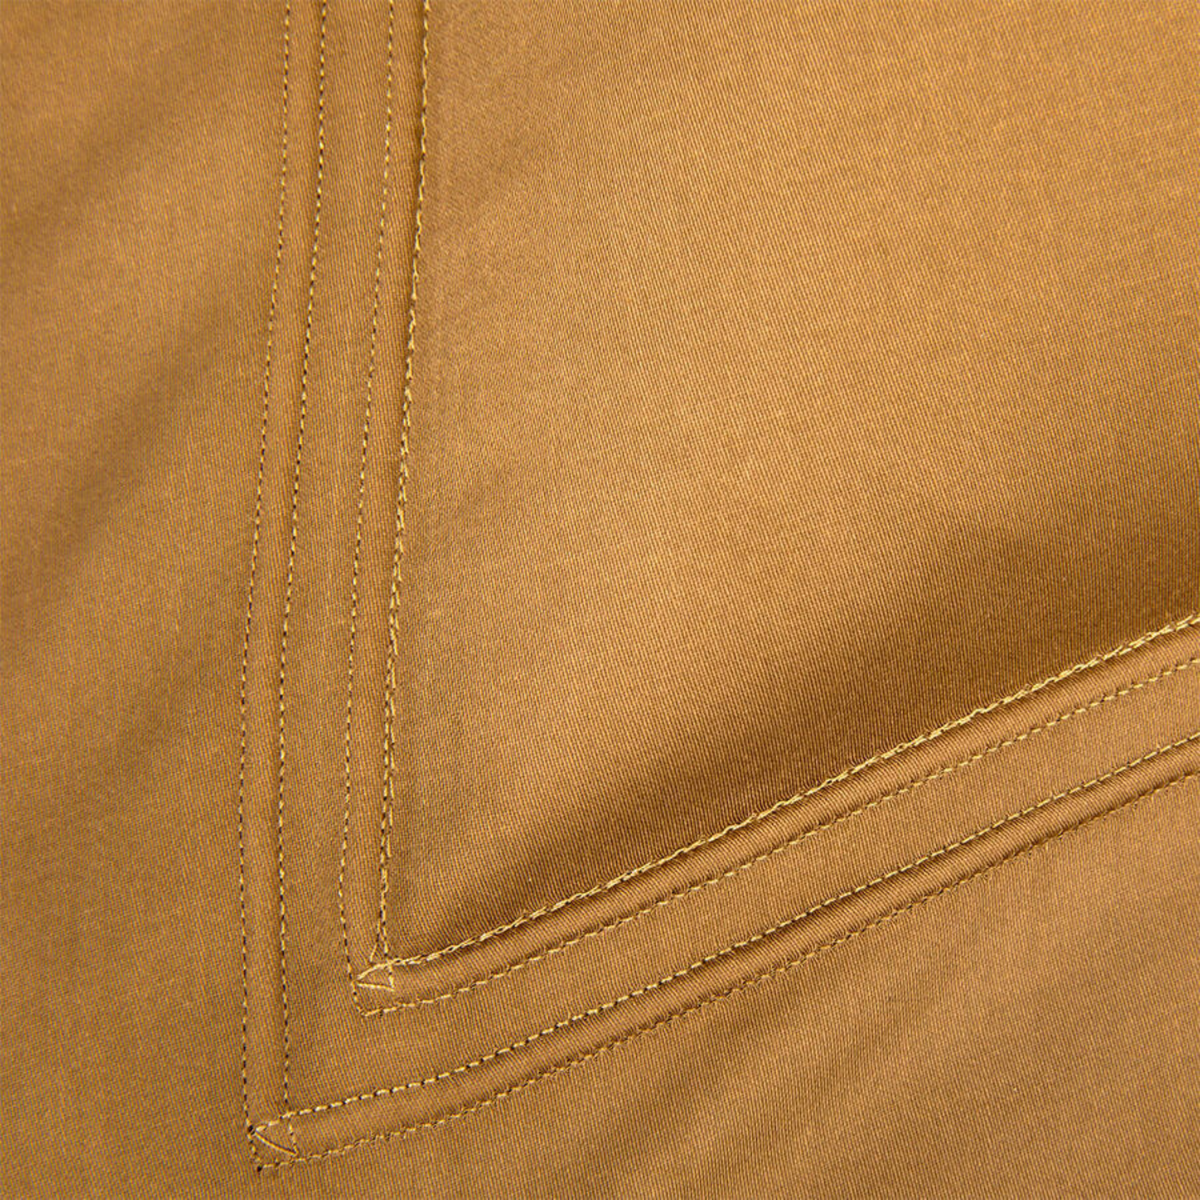 Fabric Closeup of Yves Delorme Triomphe Bedding in Bronze Color